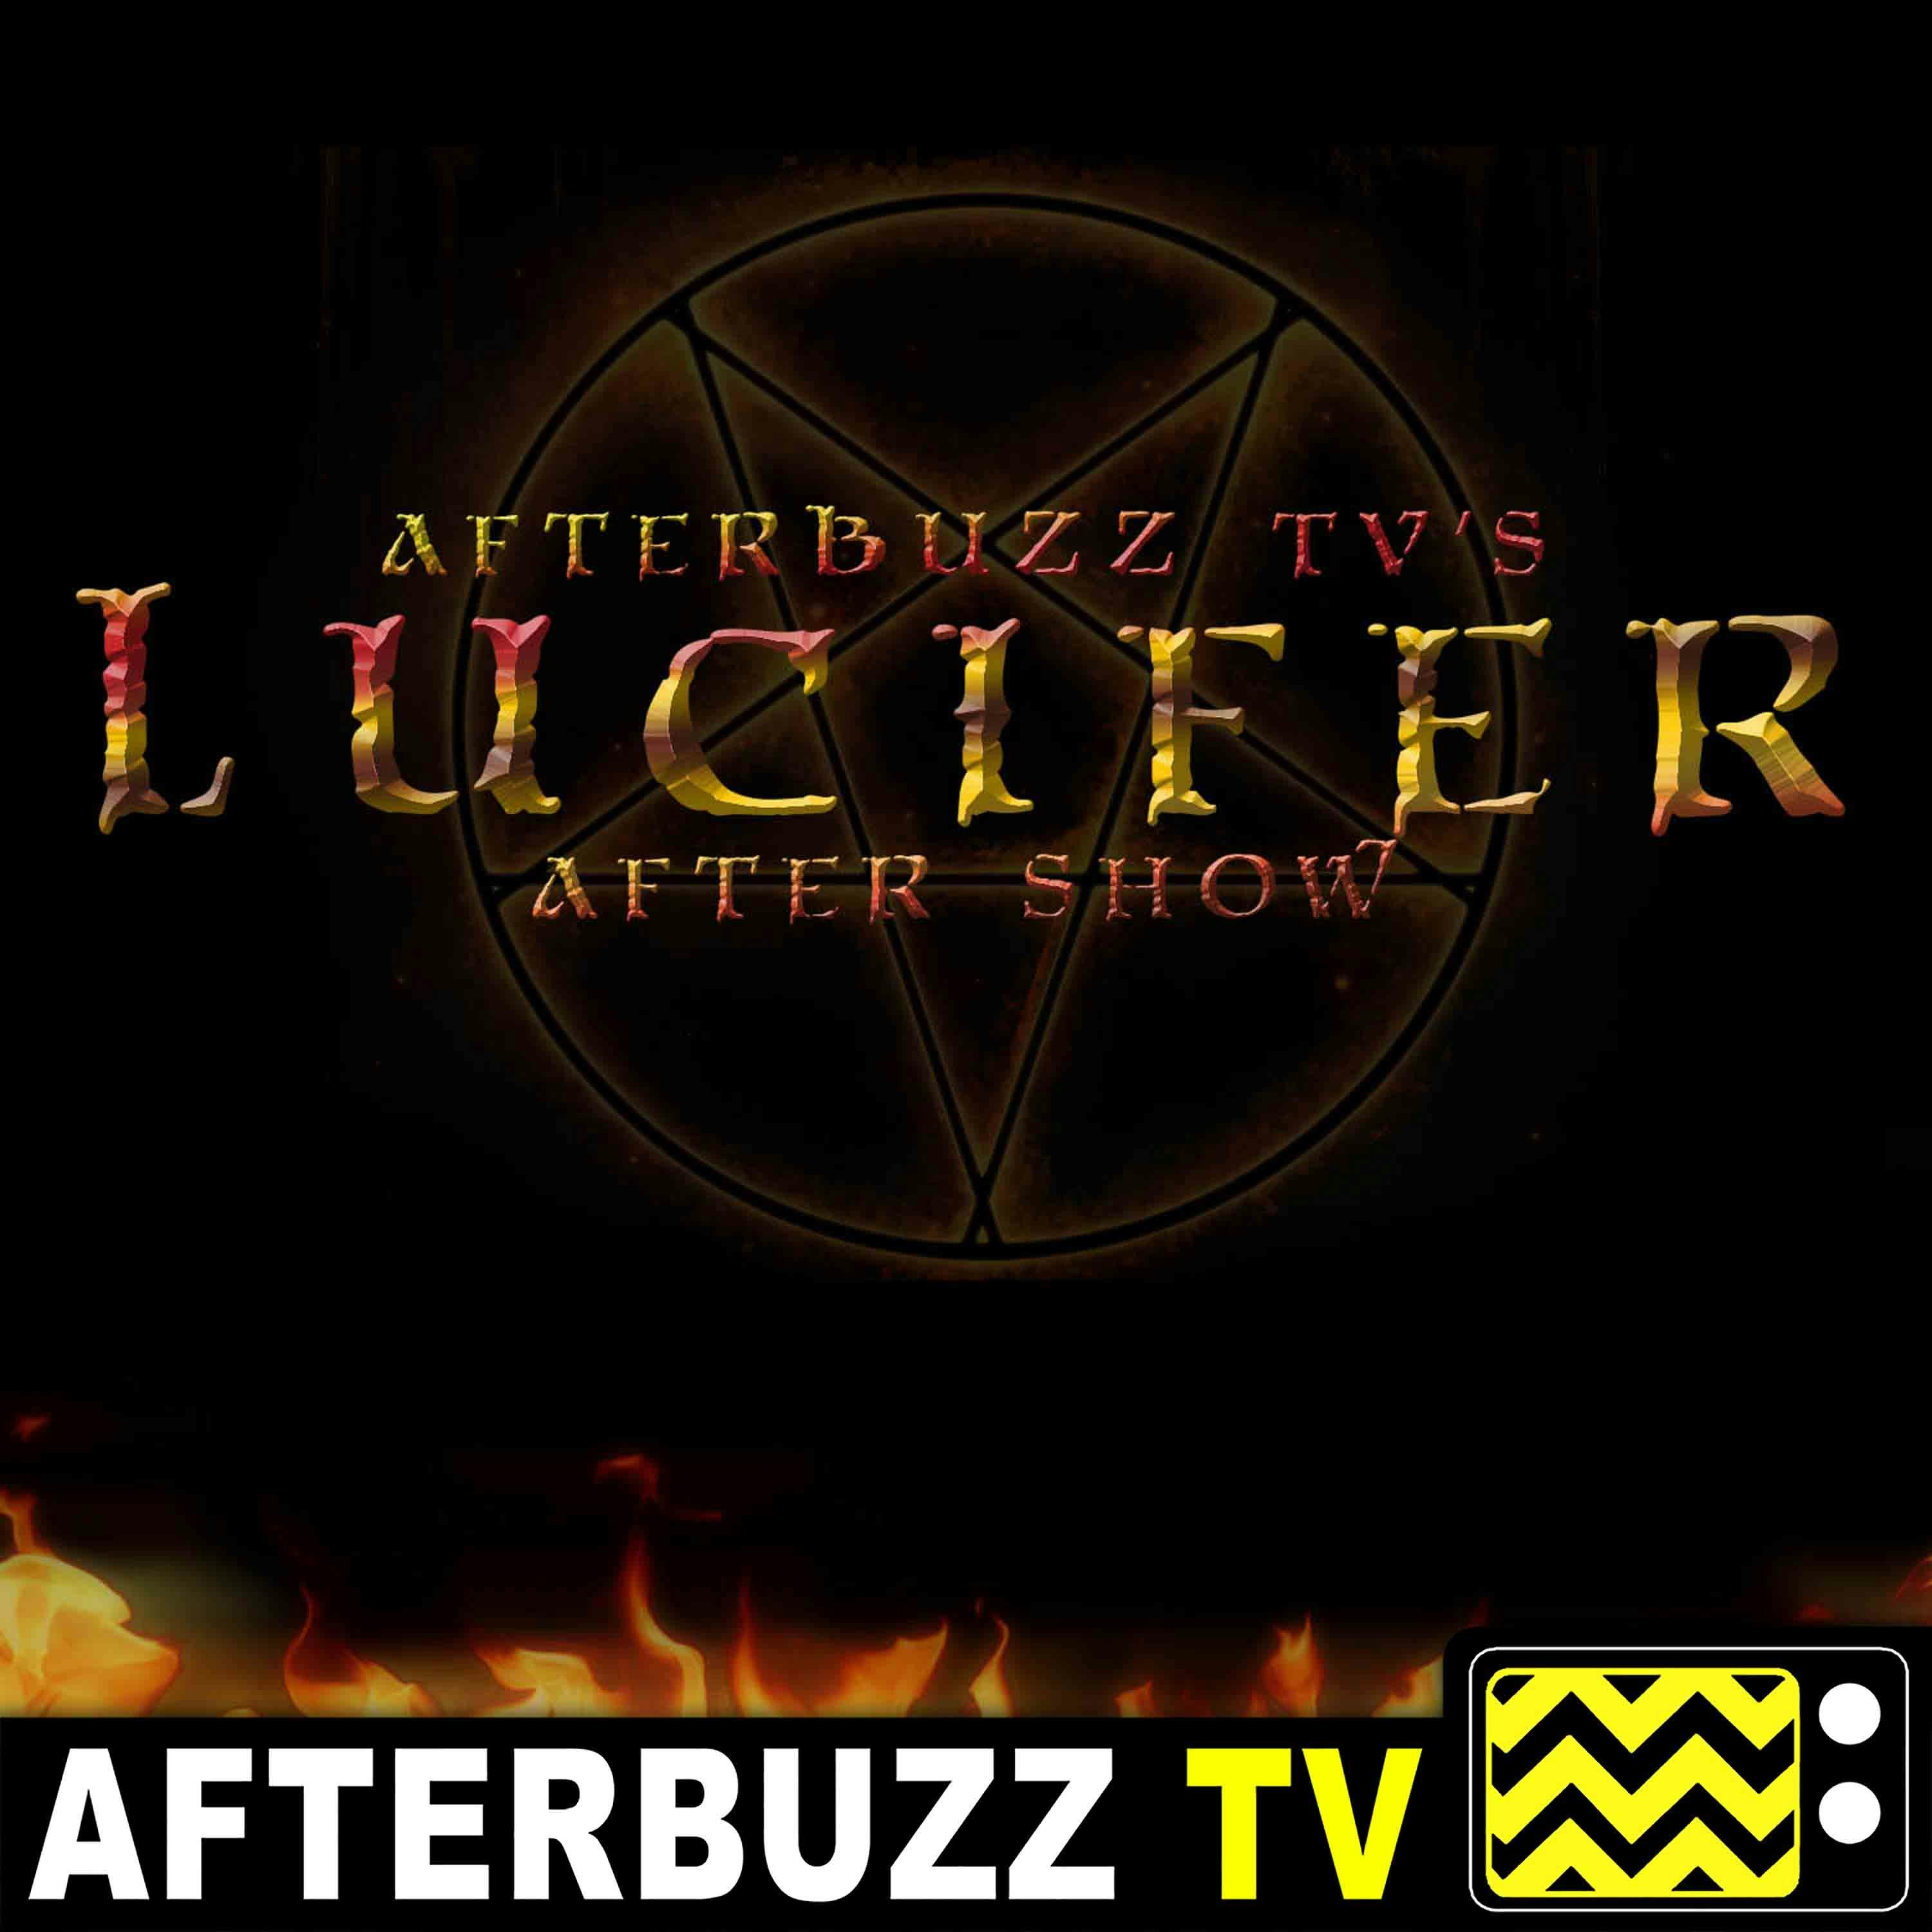 Lucifer S:2 | Everything’s Coming Up Lucifer E:1 | AfterBuzz TV AfterShow